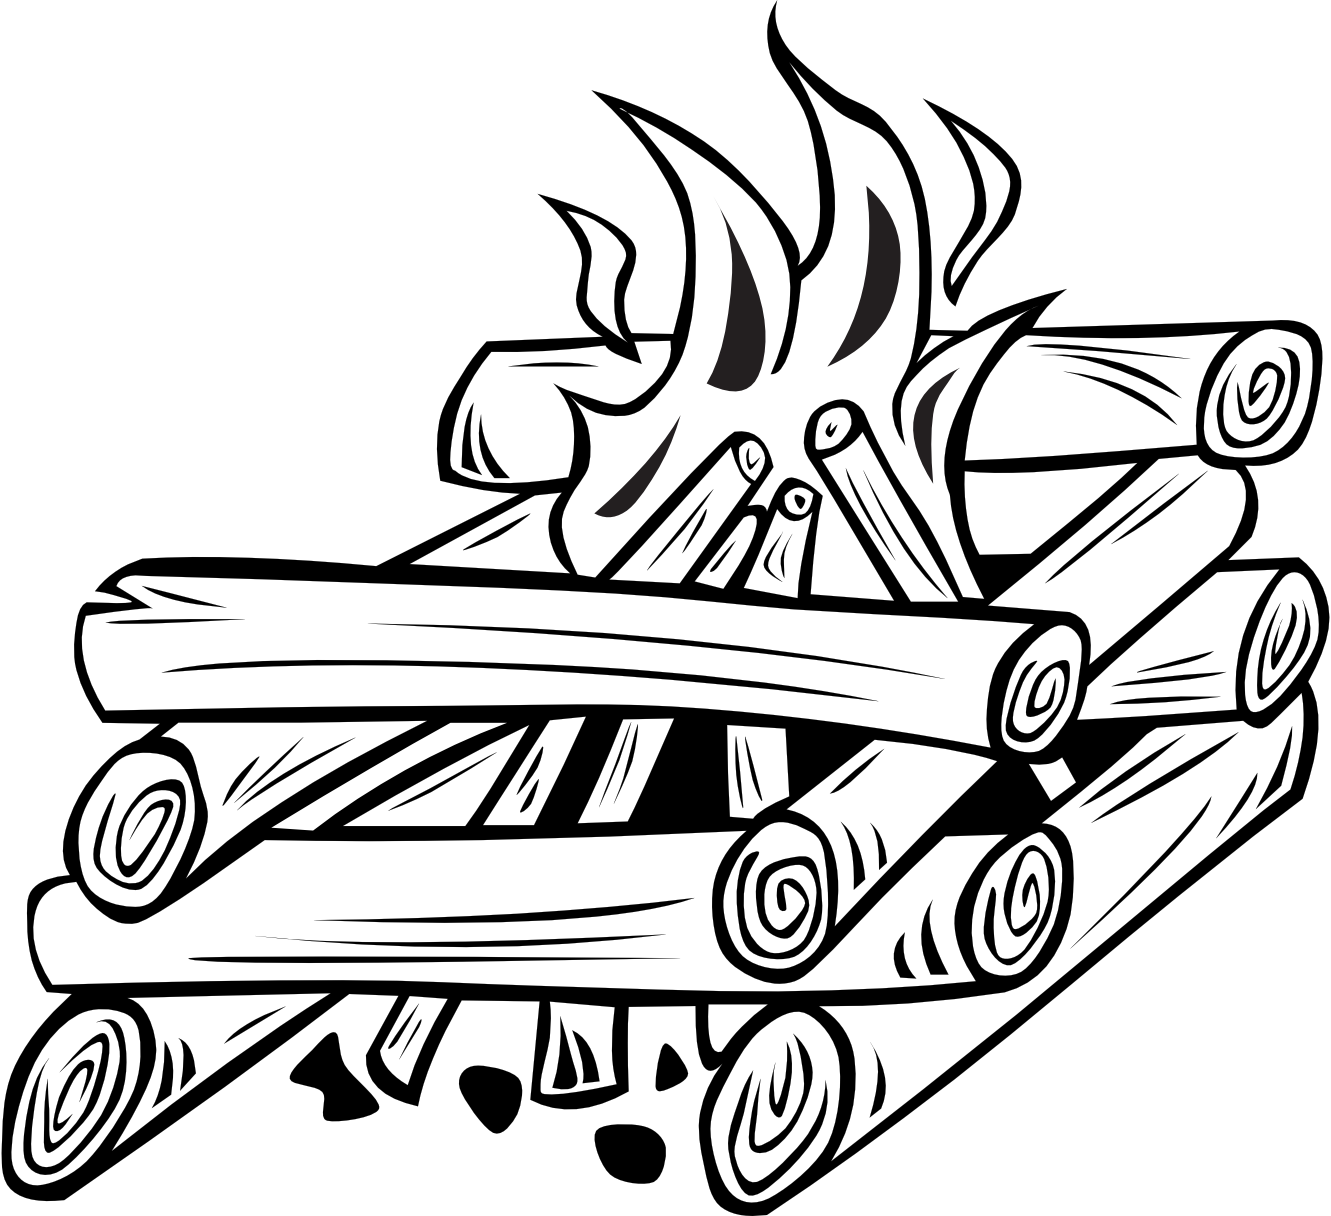 Winter clipart bonfire. Cooking black and white